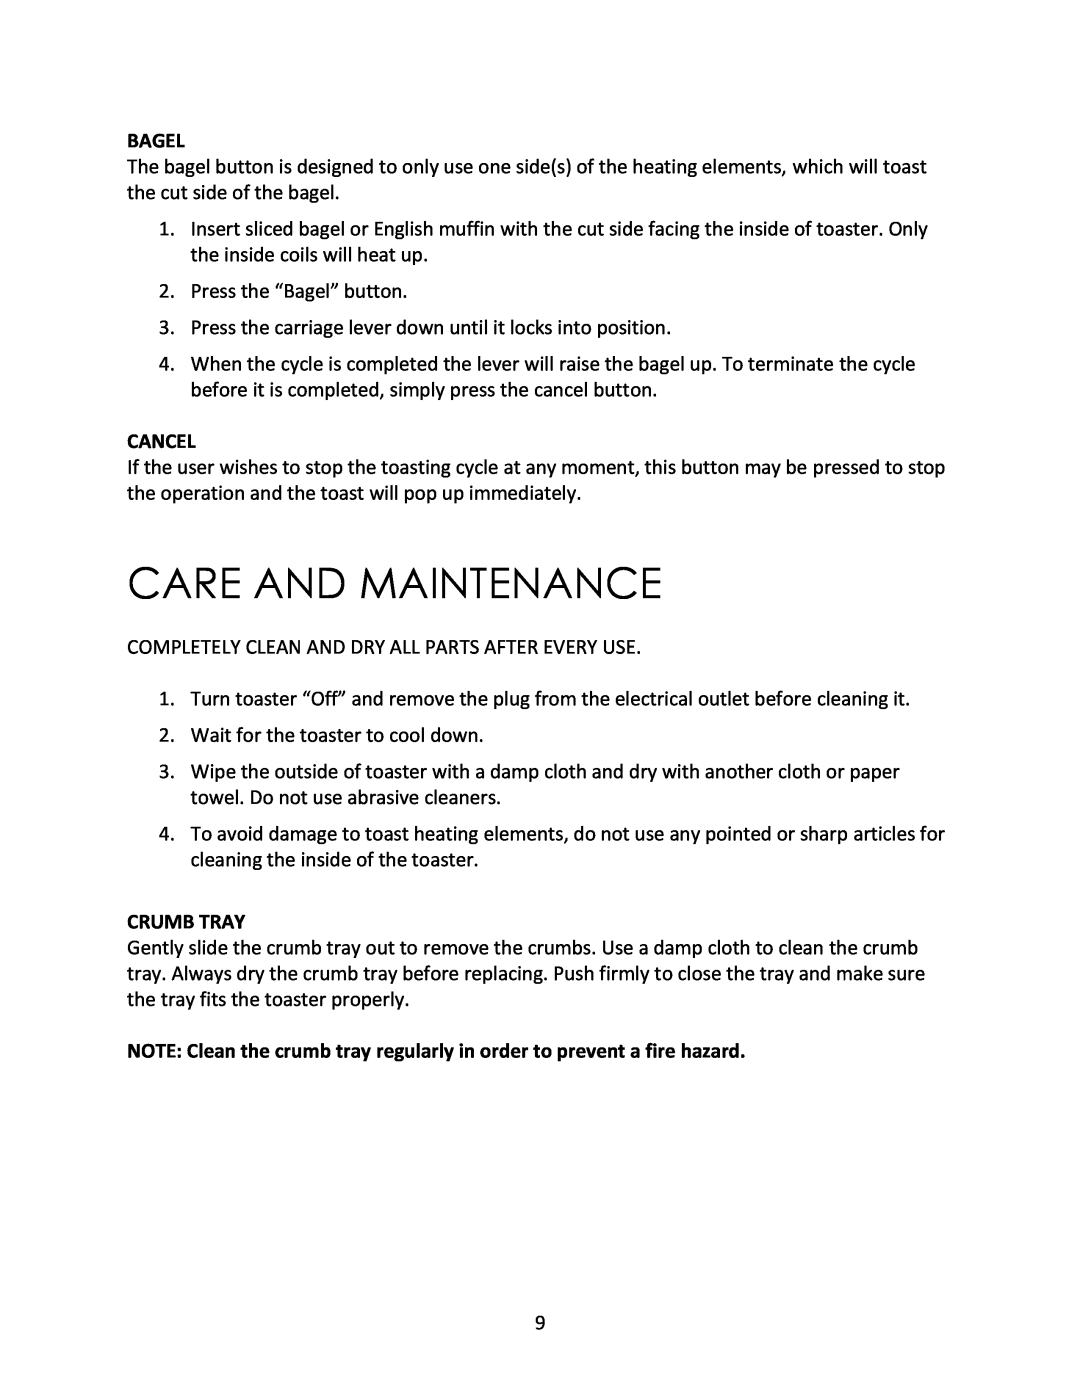 Magic Chef MCST2ST instruction manual Care And Maintenance, Bagel, Cancel, Crumb Tray 